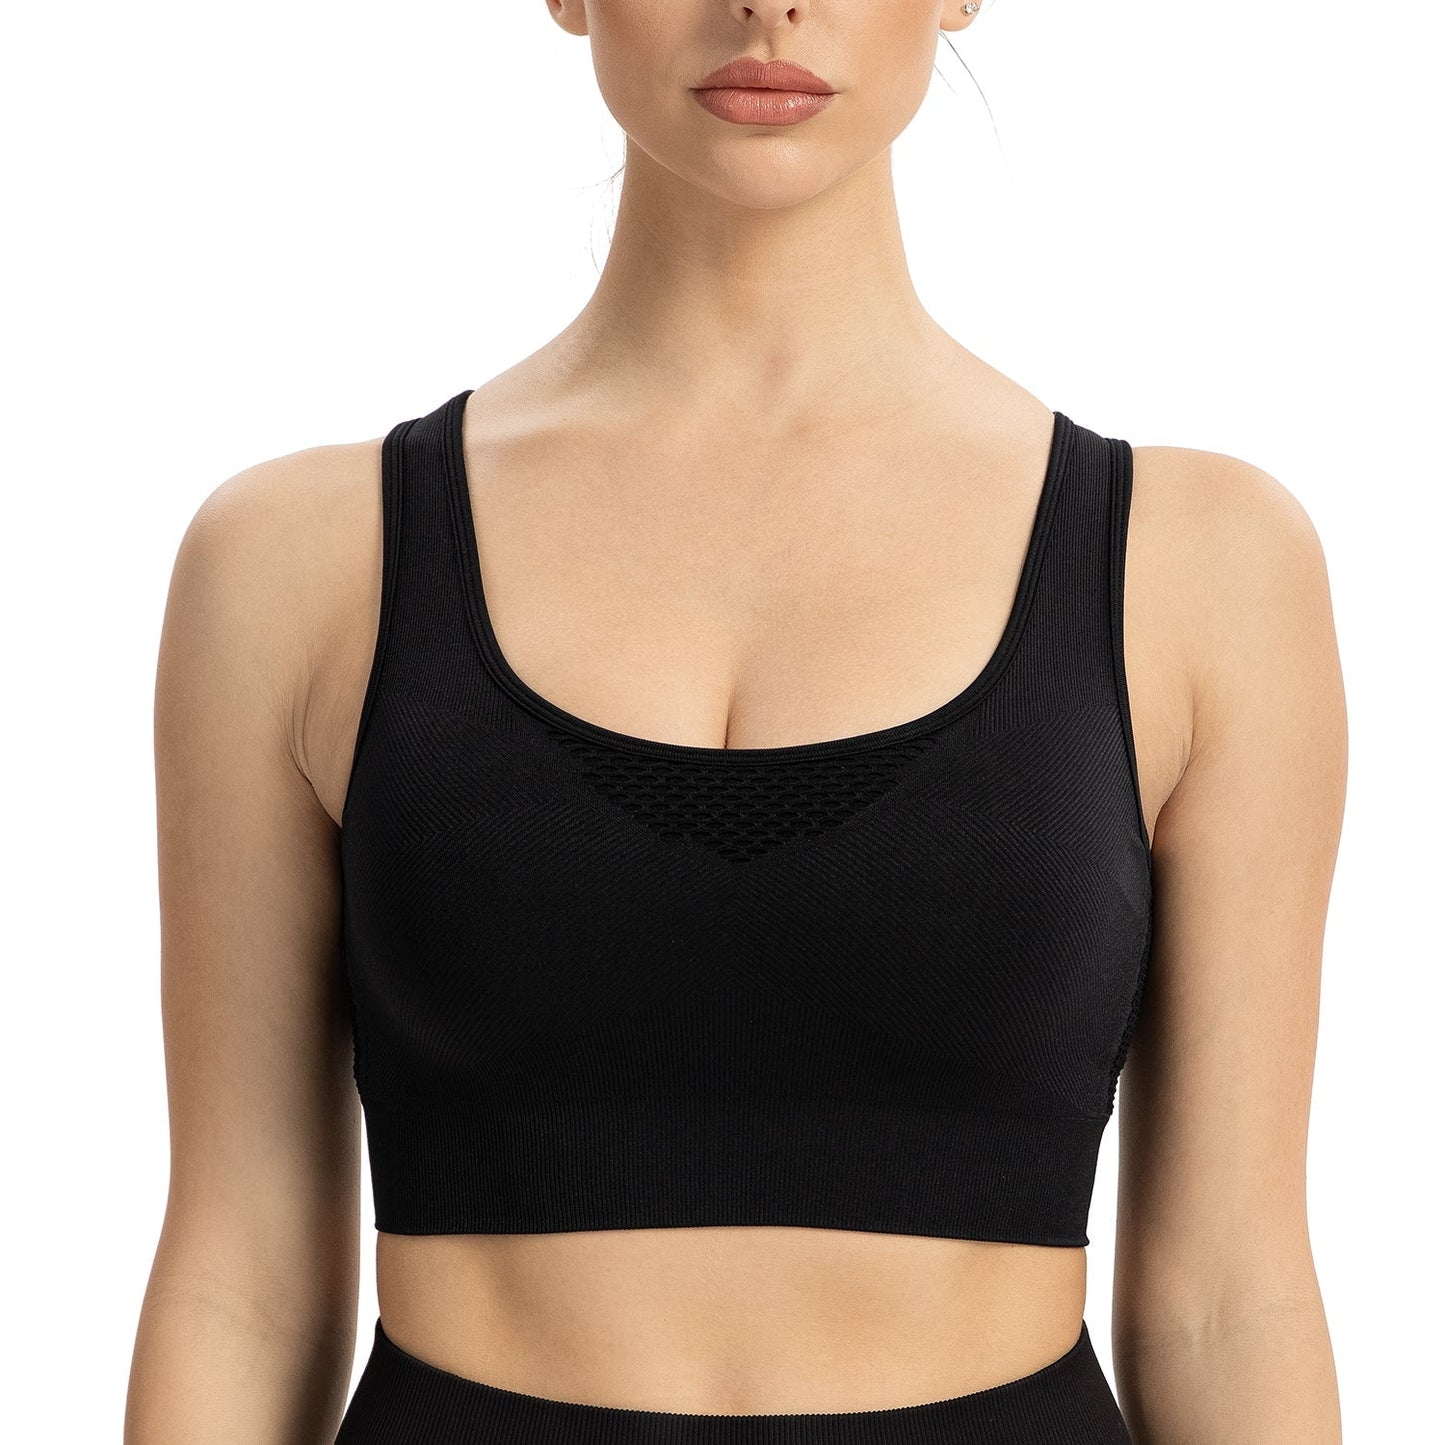 Women’s Longline Sports Bra Wirefree Padded Hollow Out Medium Support Yoga Bras for Running Workout Tank Tops